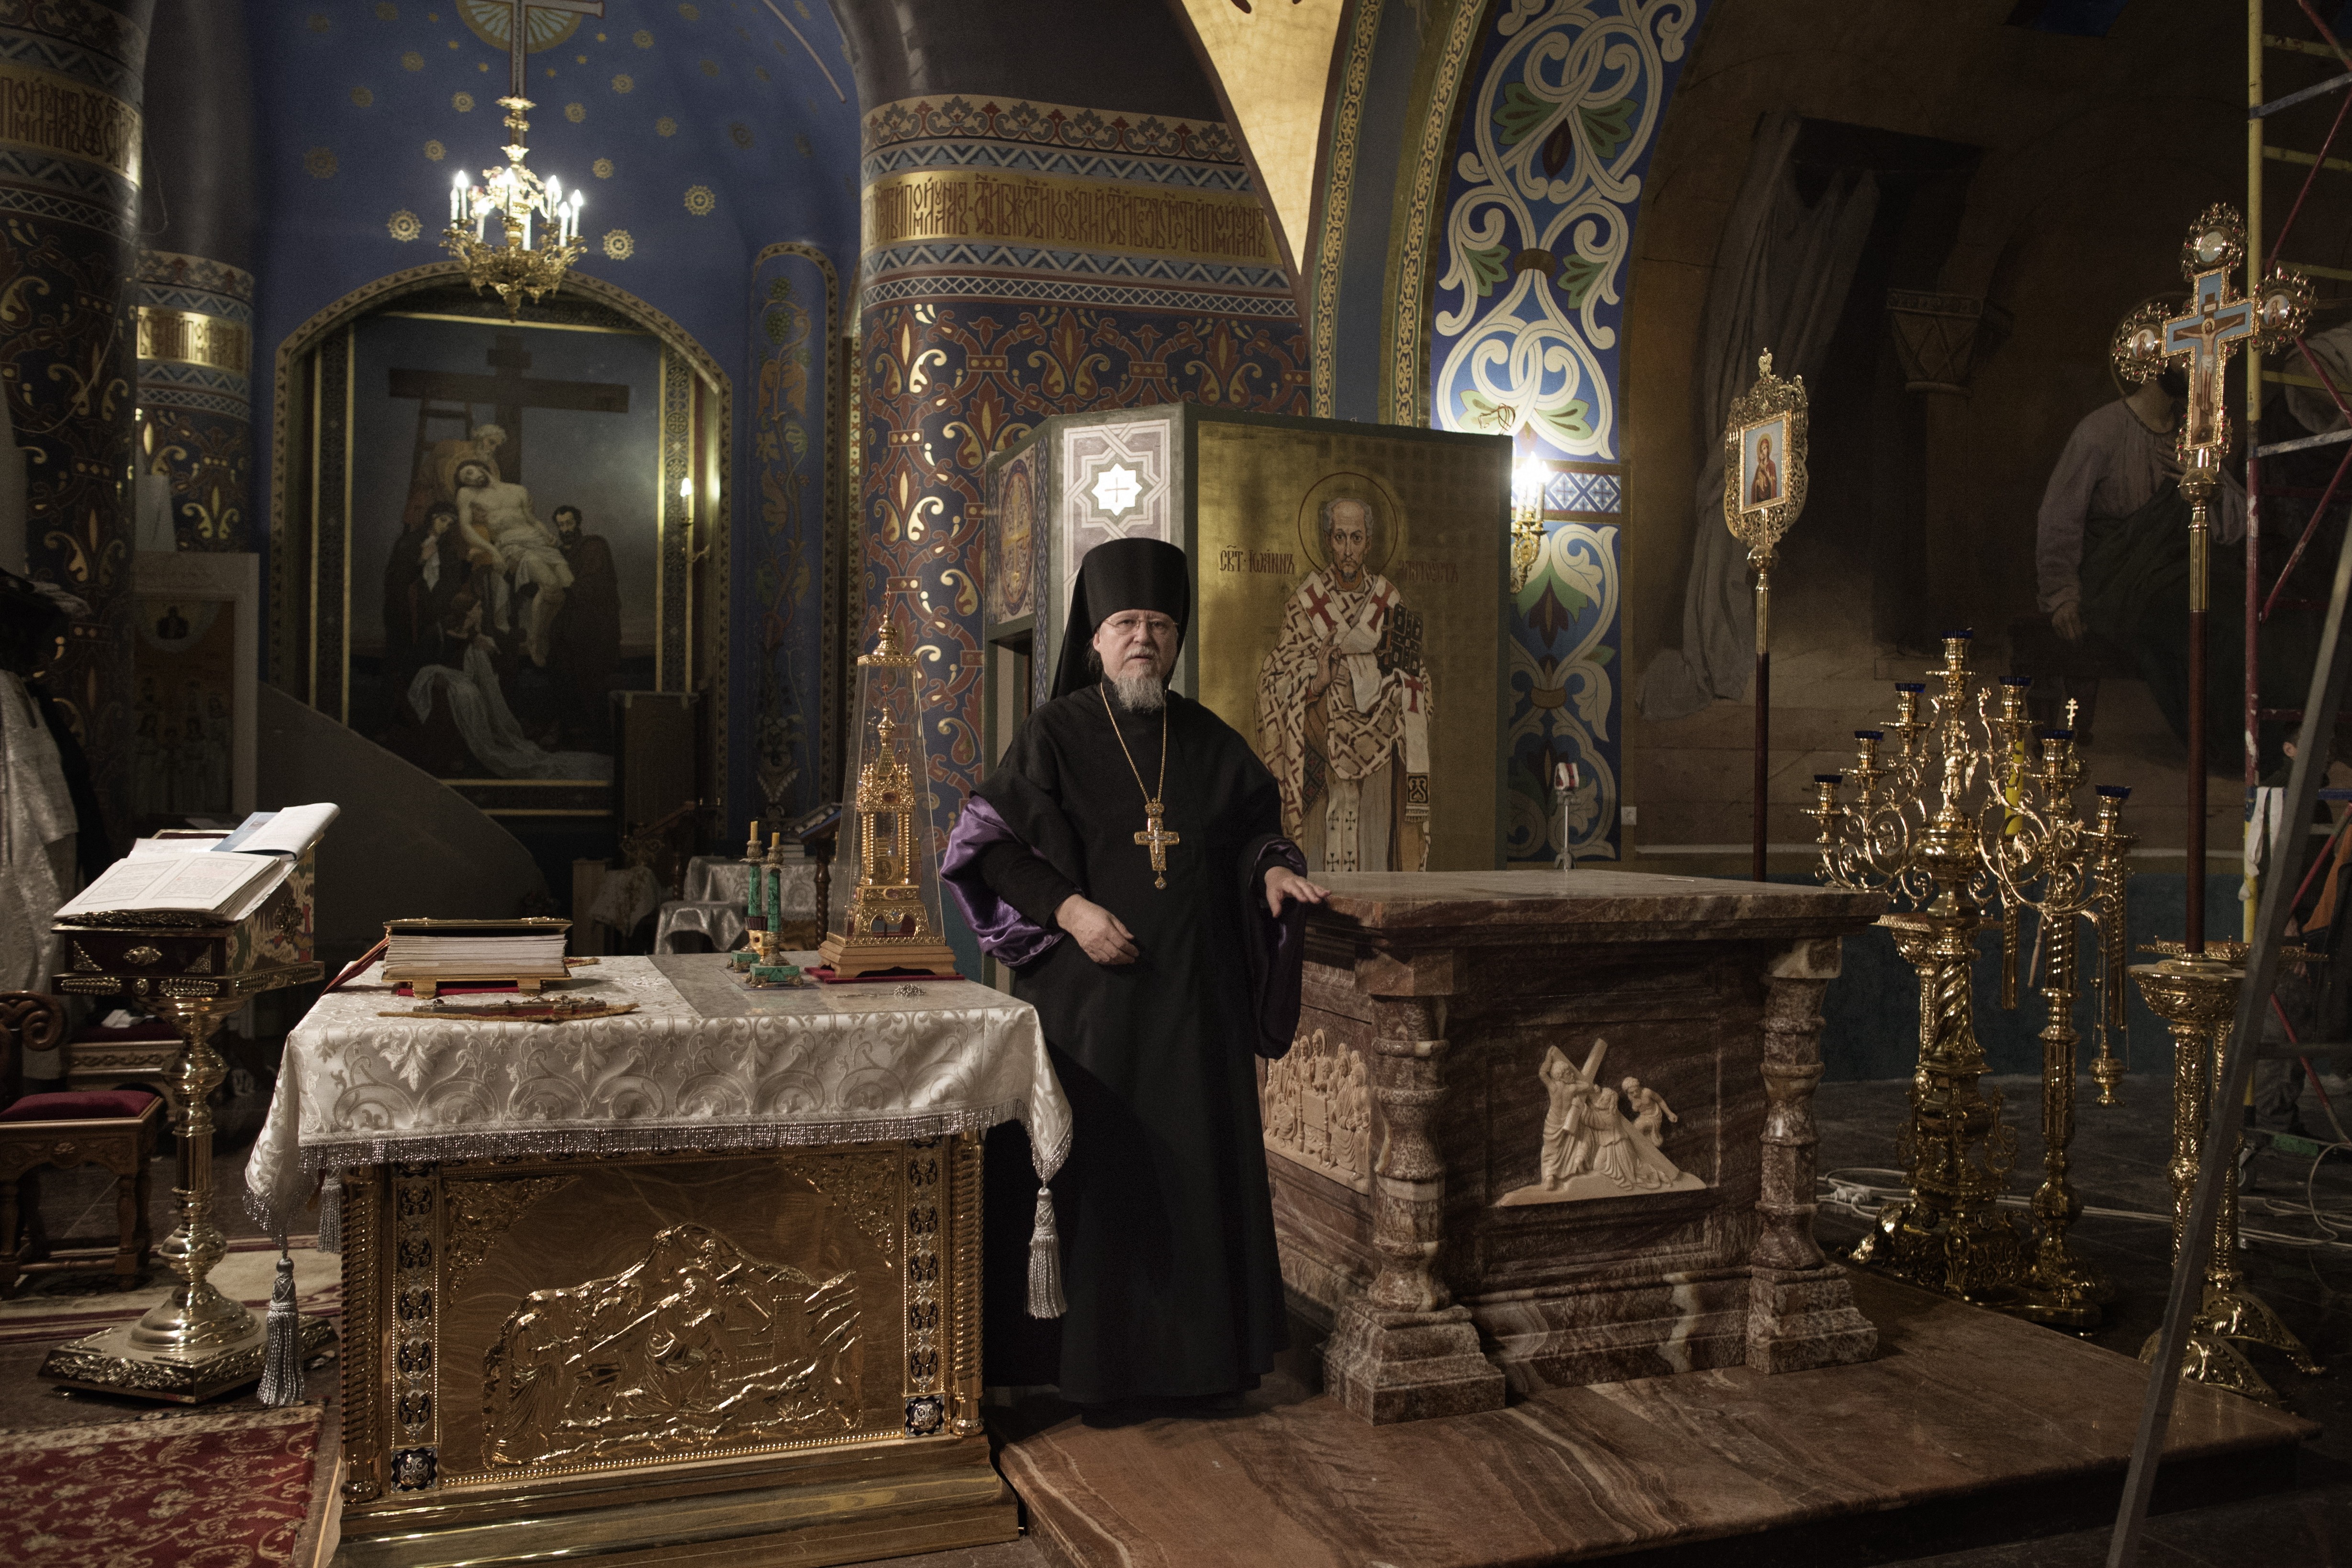 Sochi, Russia, Jan. 15,  2014: Father Flavian, the abbot of the Cathedral of the Holy Face of Christ the Savior, poses on its altar. The ornate cathedral, which stands inside the Olympic village in Sochi, was built in  one year.